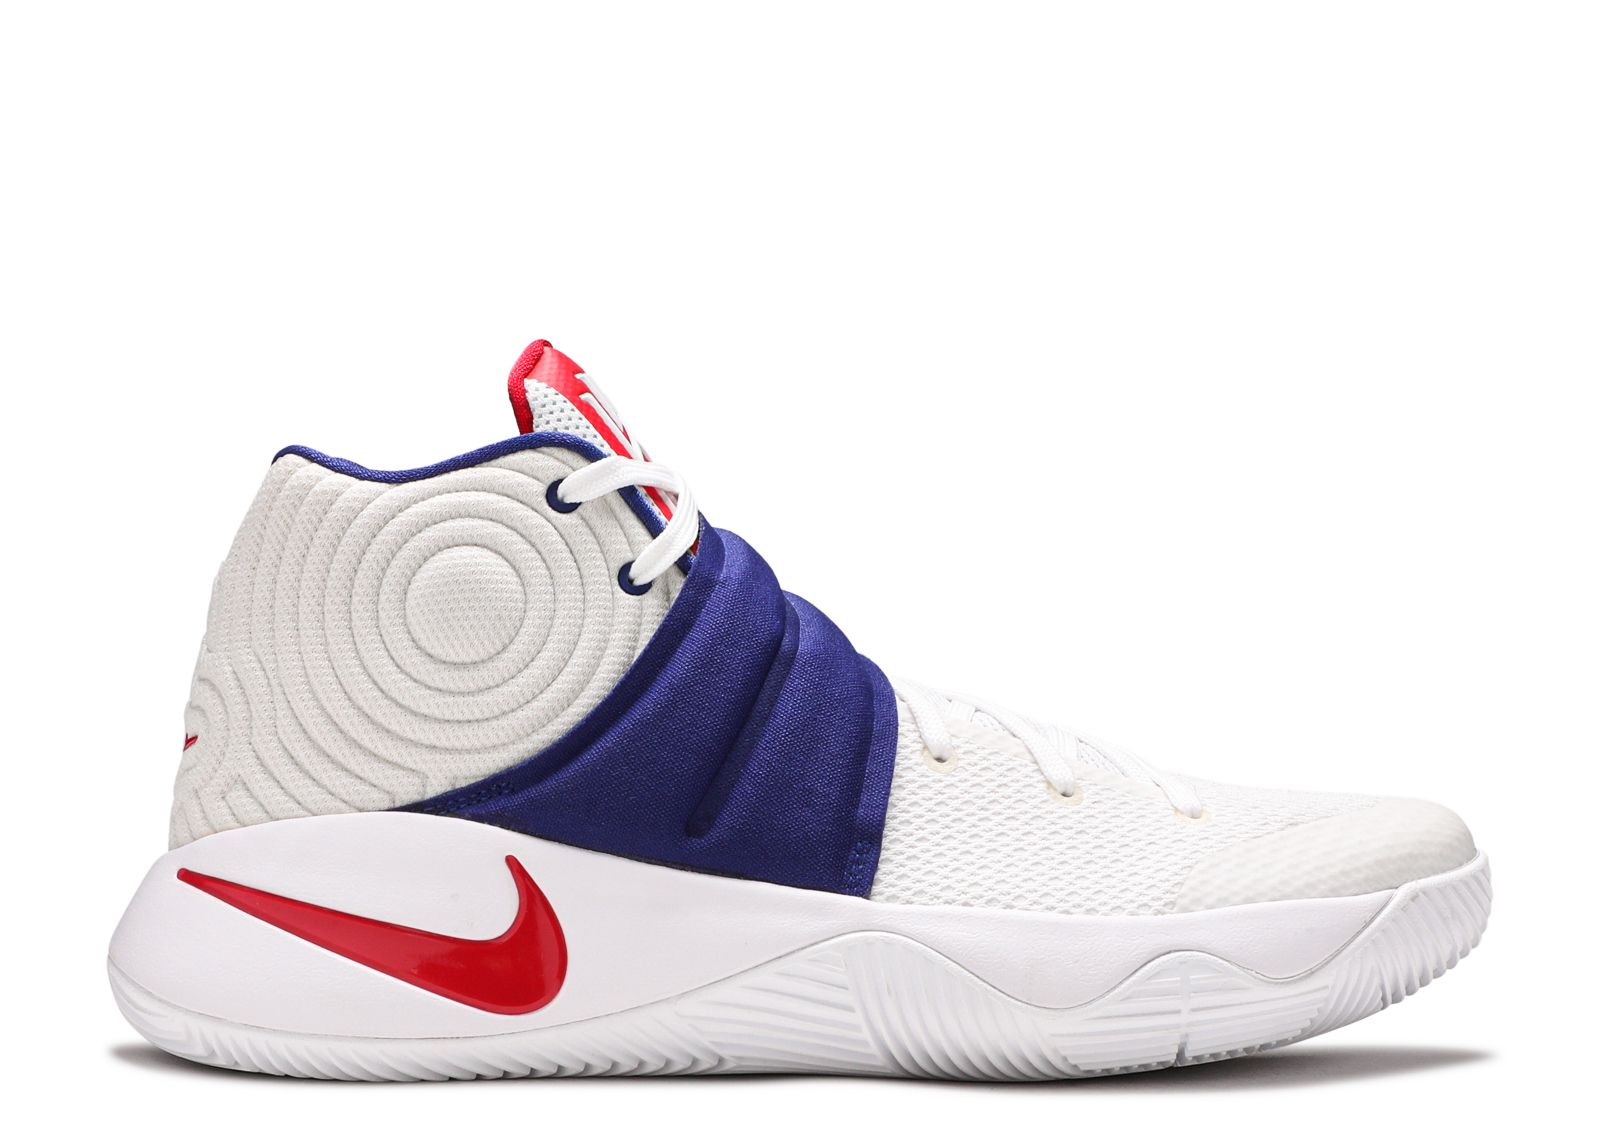 red and white kyrie 2